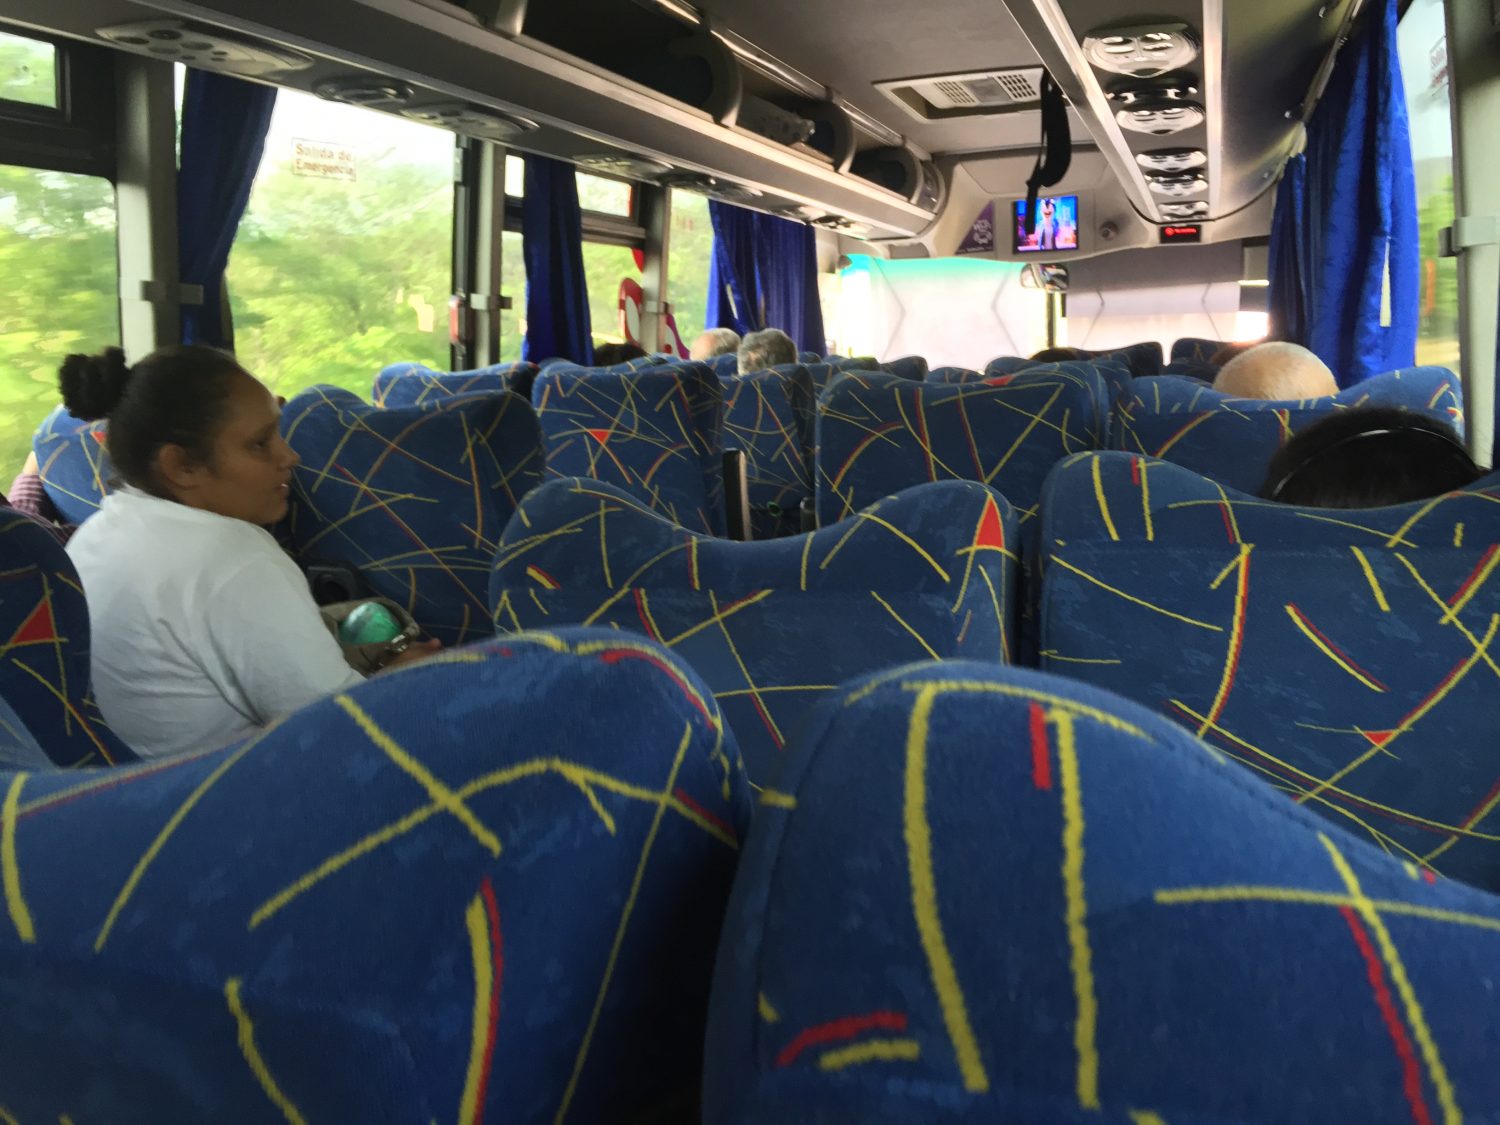 Day 79 – Early Morning Bus to Managua, Nicaragua